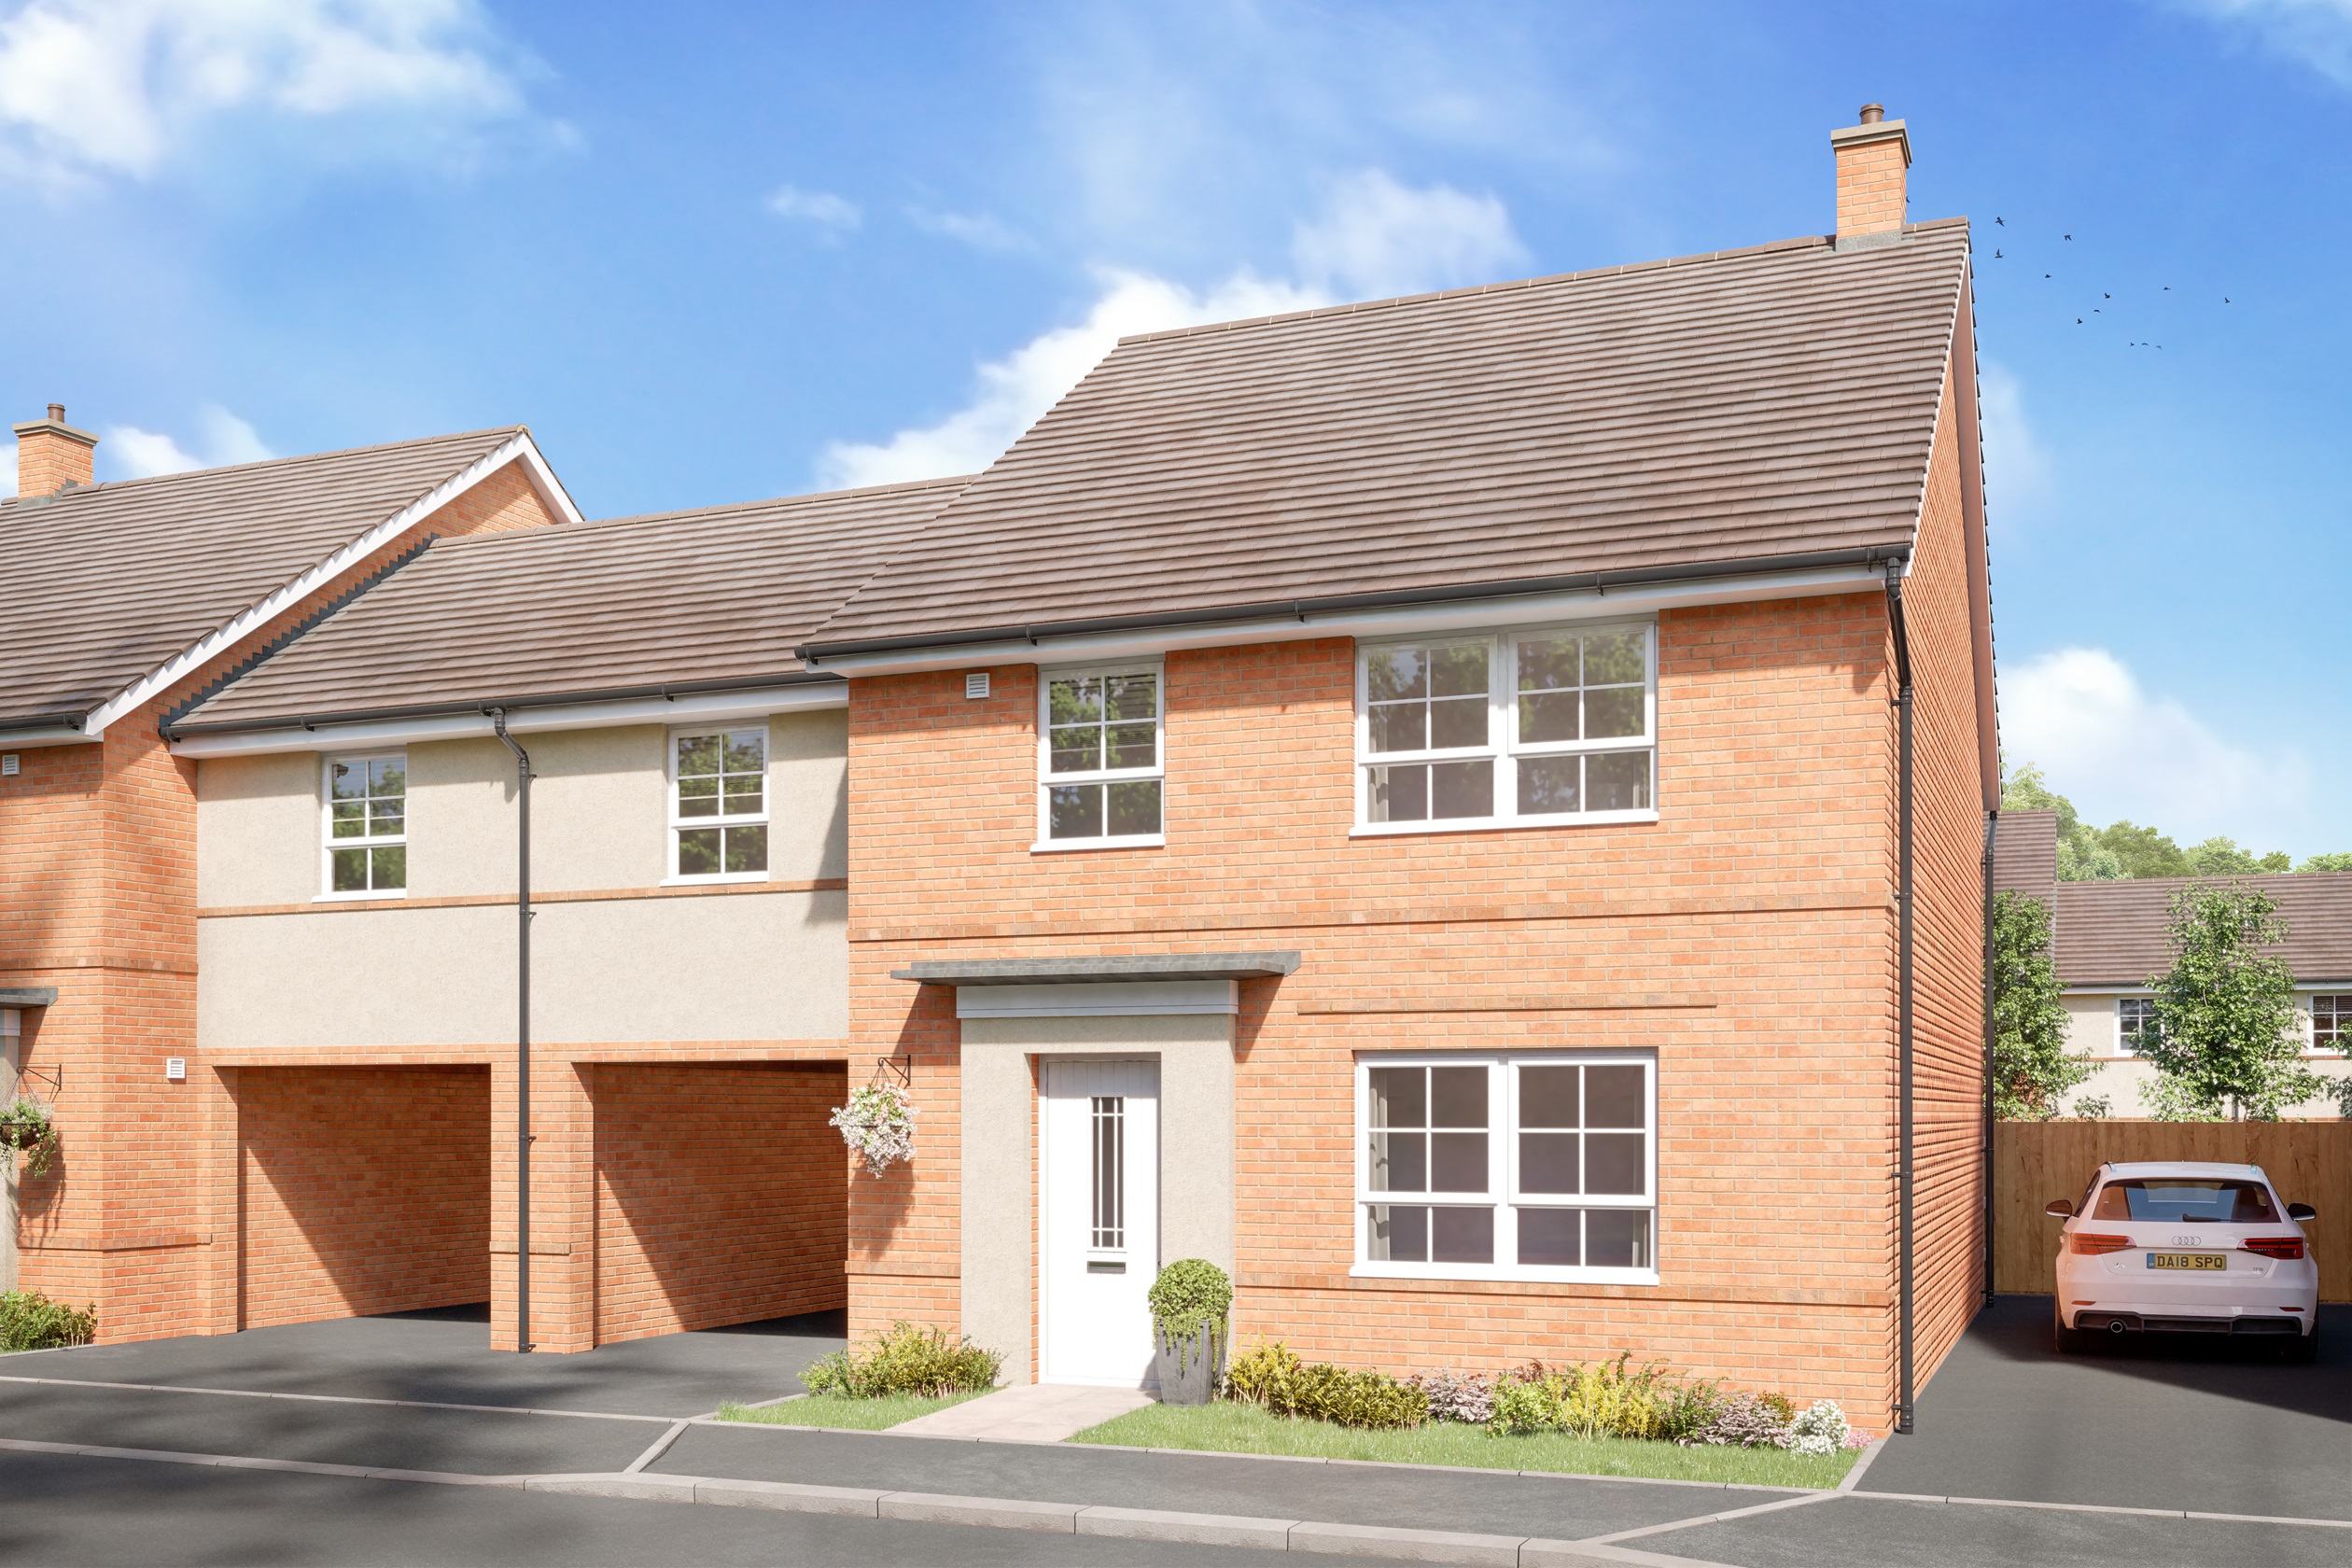 New Homes In Oxfordshire For Sale Barratt Homes